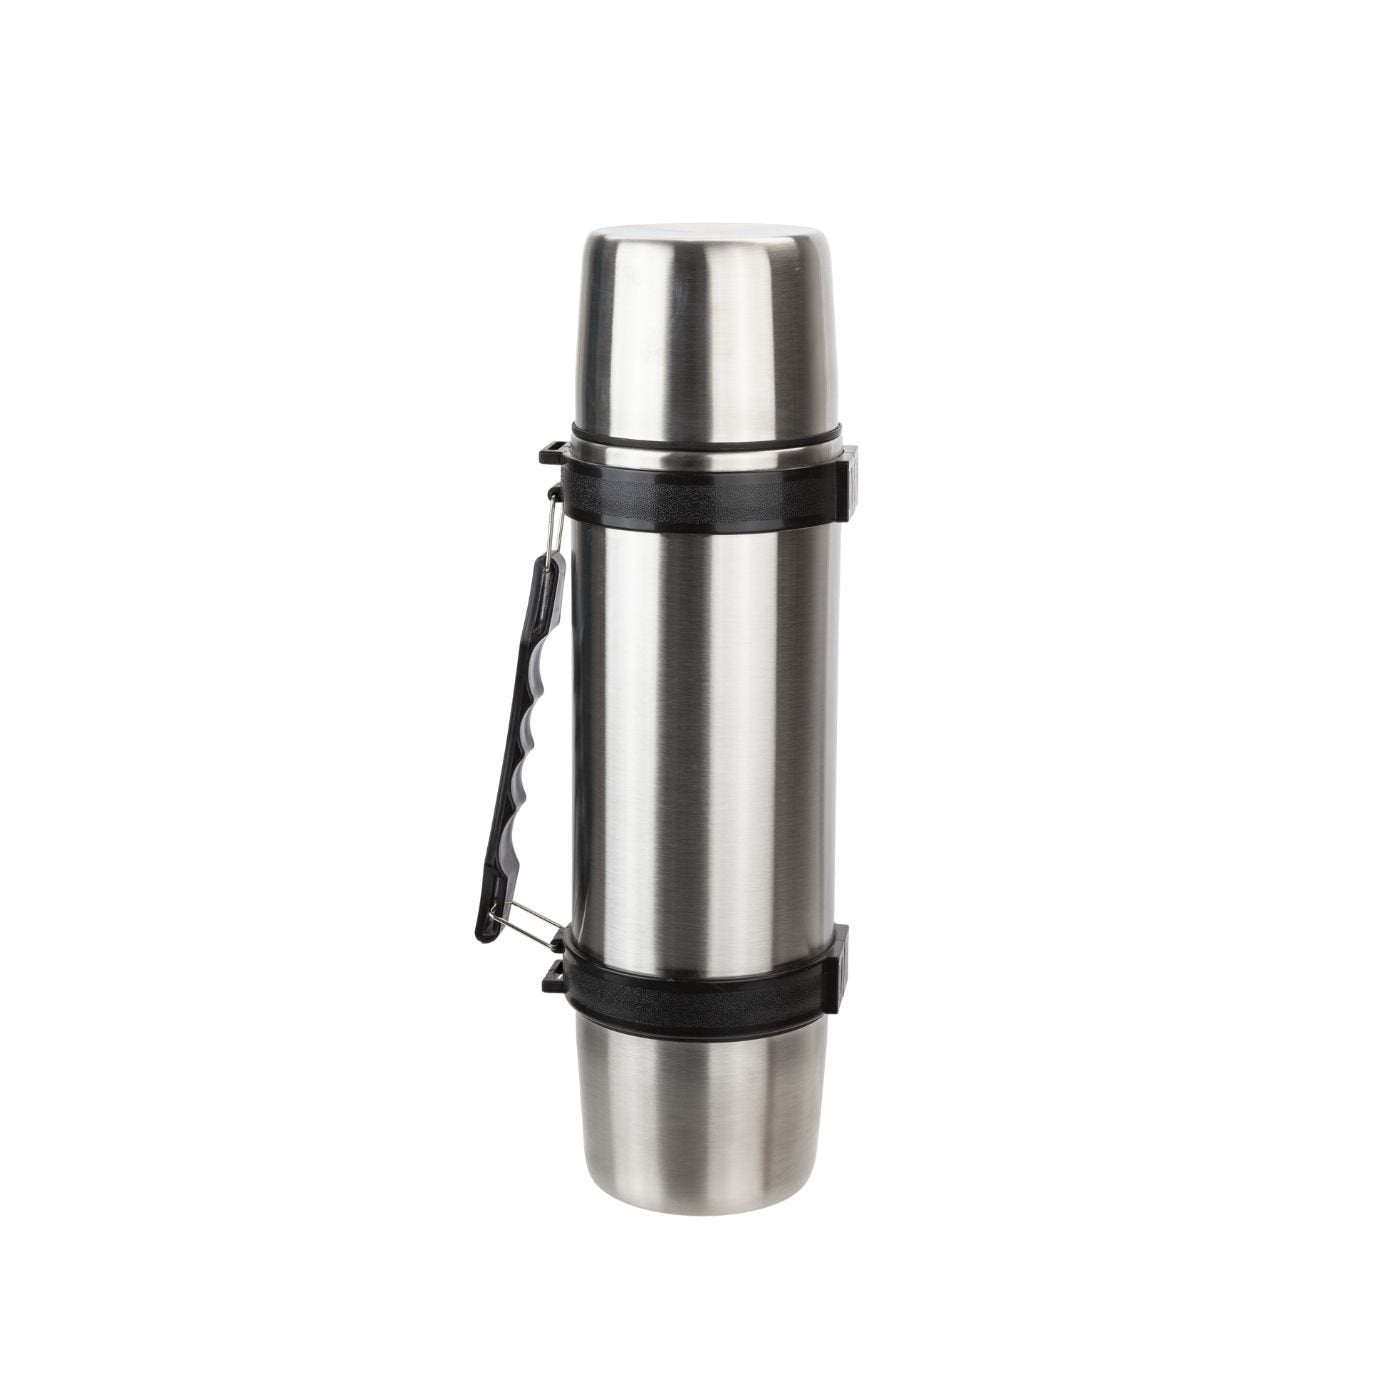 Summit Duo Cup Thermosfles - Stainless steel Thermosfles - Reisartikelen-nl